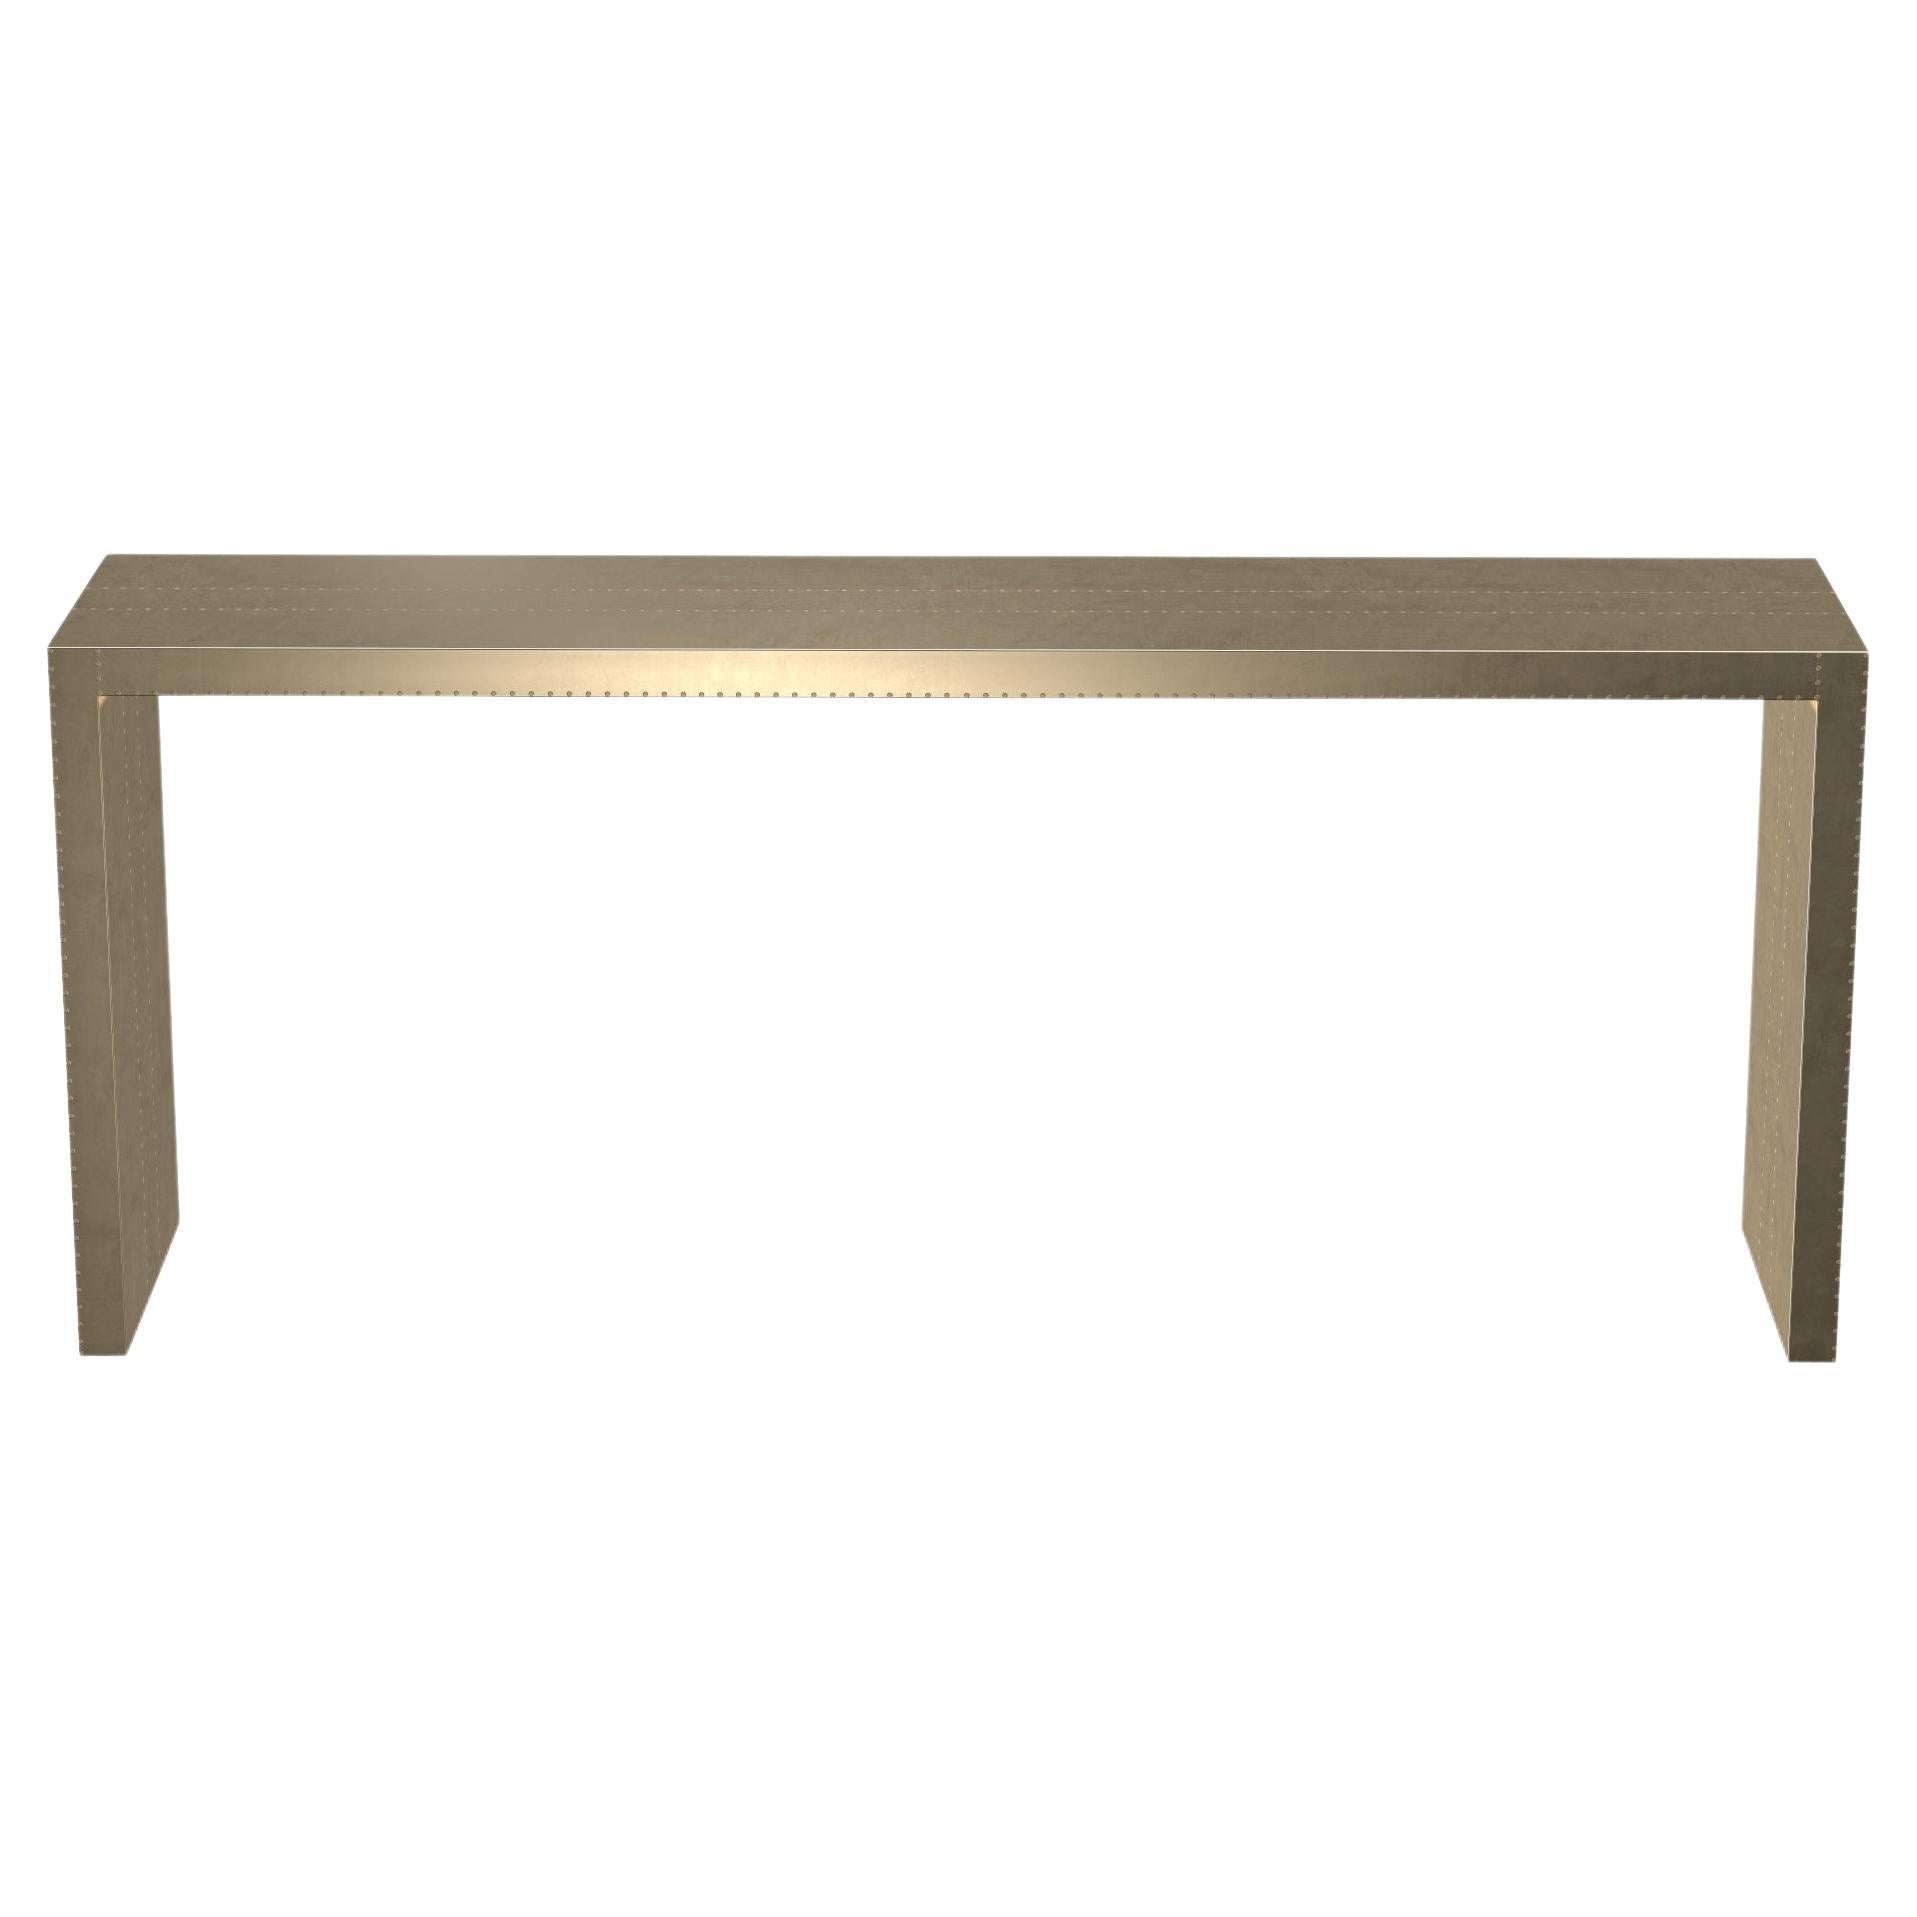 Art Deco Game Tables Rectangular Console in Smooth Brass by Alison Spear